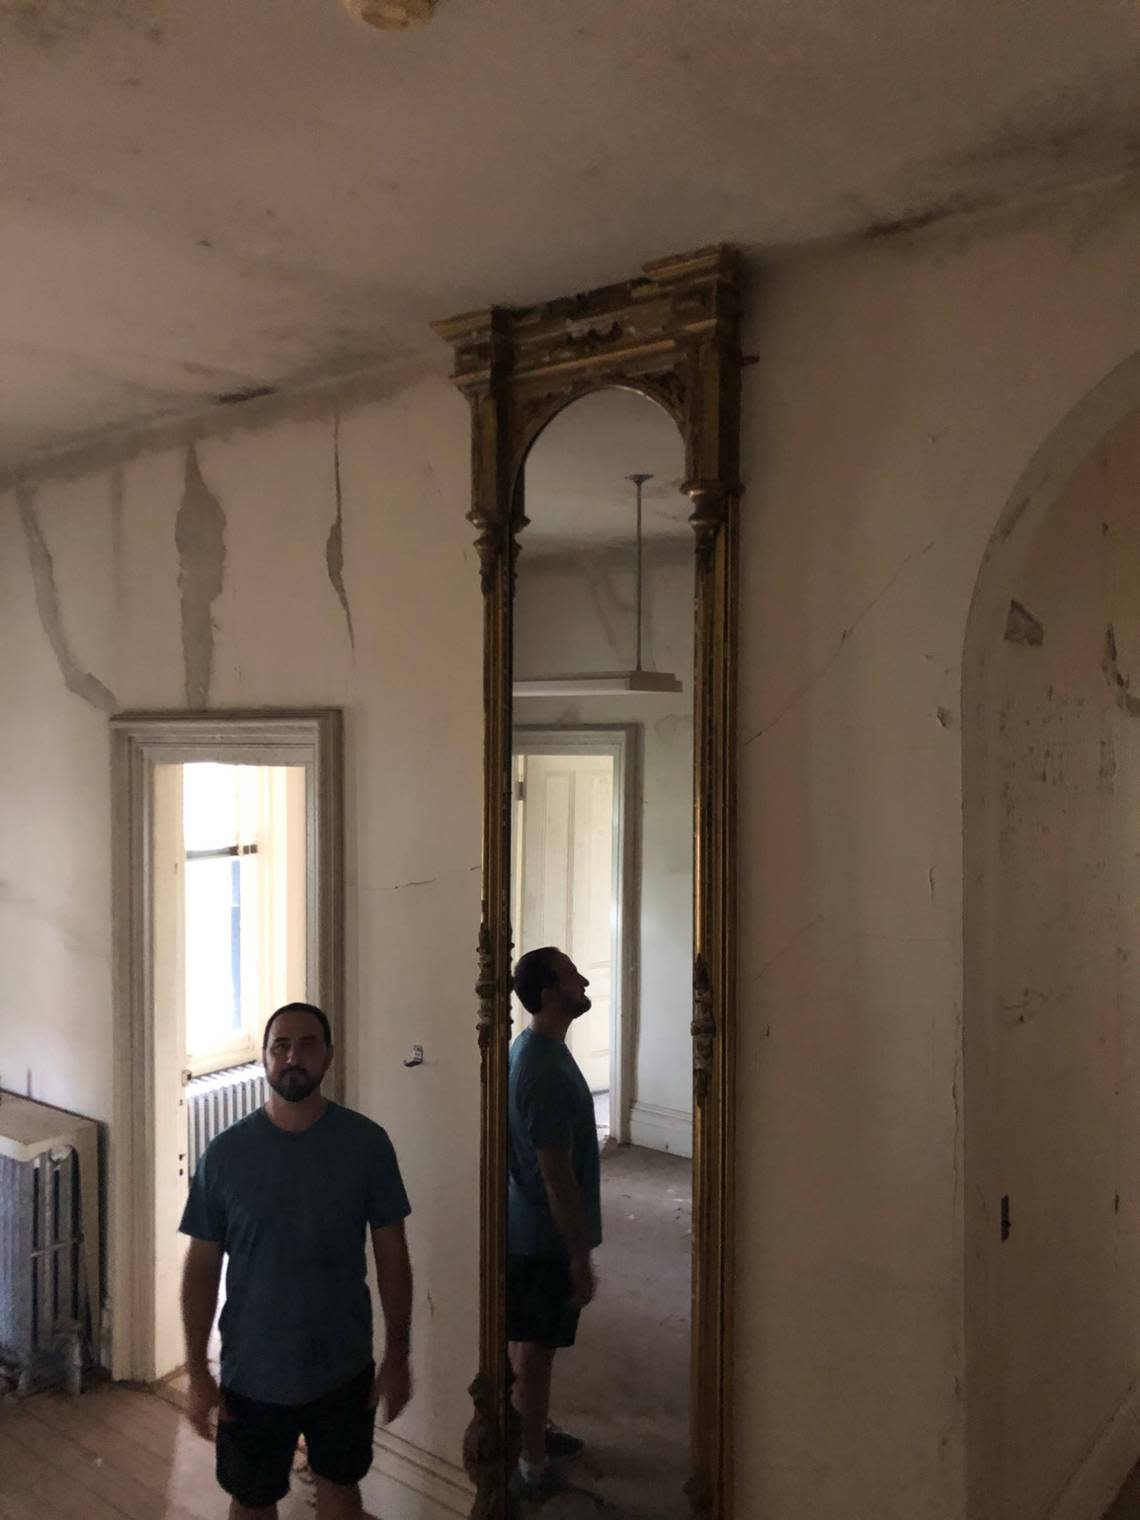 Jeff Turpin stands in the entryway next to a mirror that is original to the house prior to renovations.